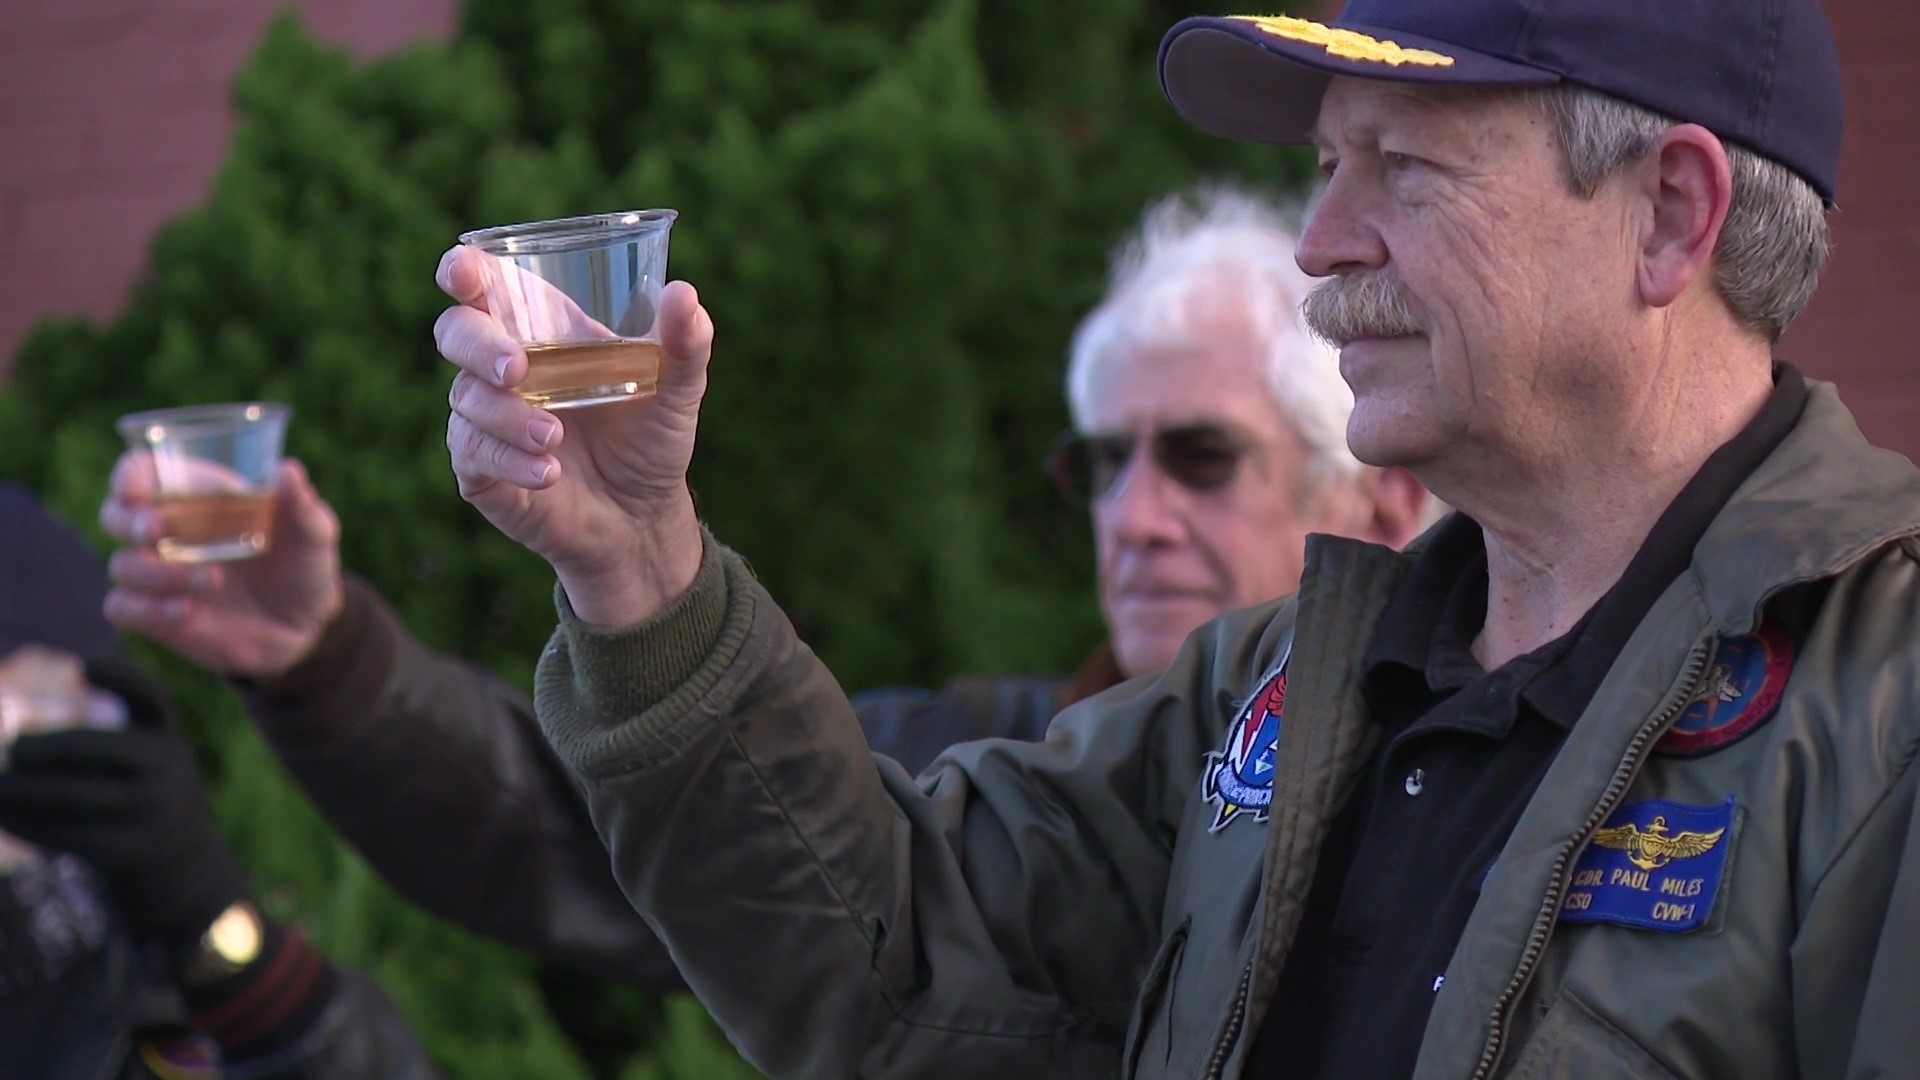 To celebrate, the F-14 Tomcat Monument Association on Monday held a champagne toast to pay tribute to the iconic aircraft and its first pilots.